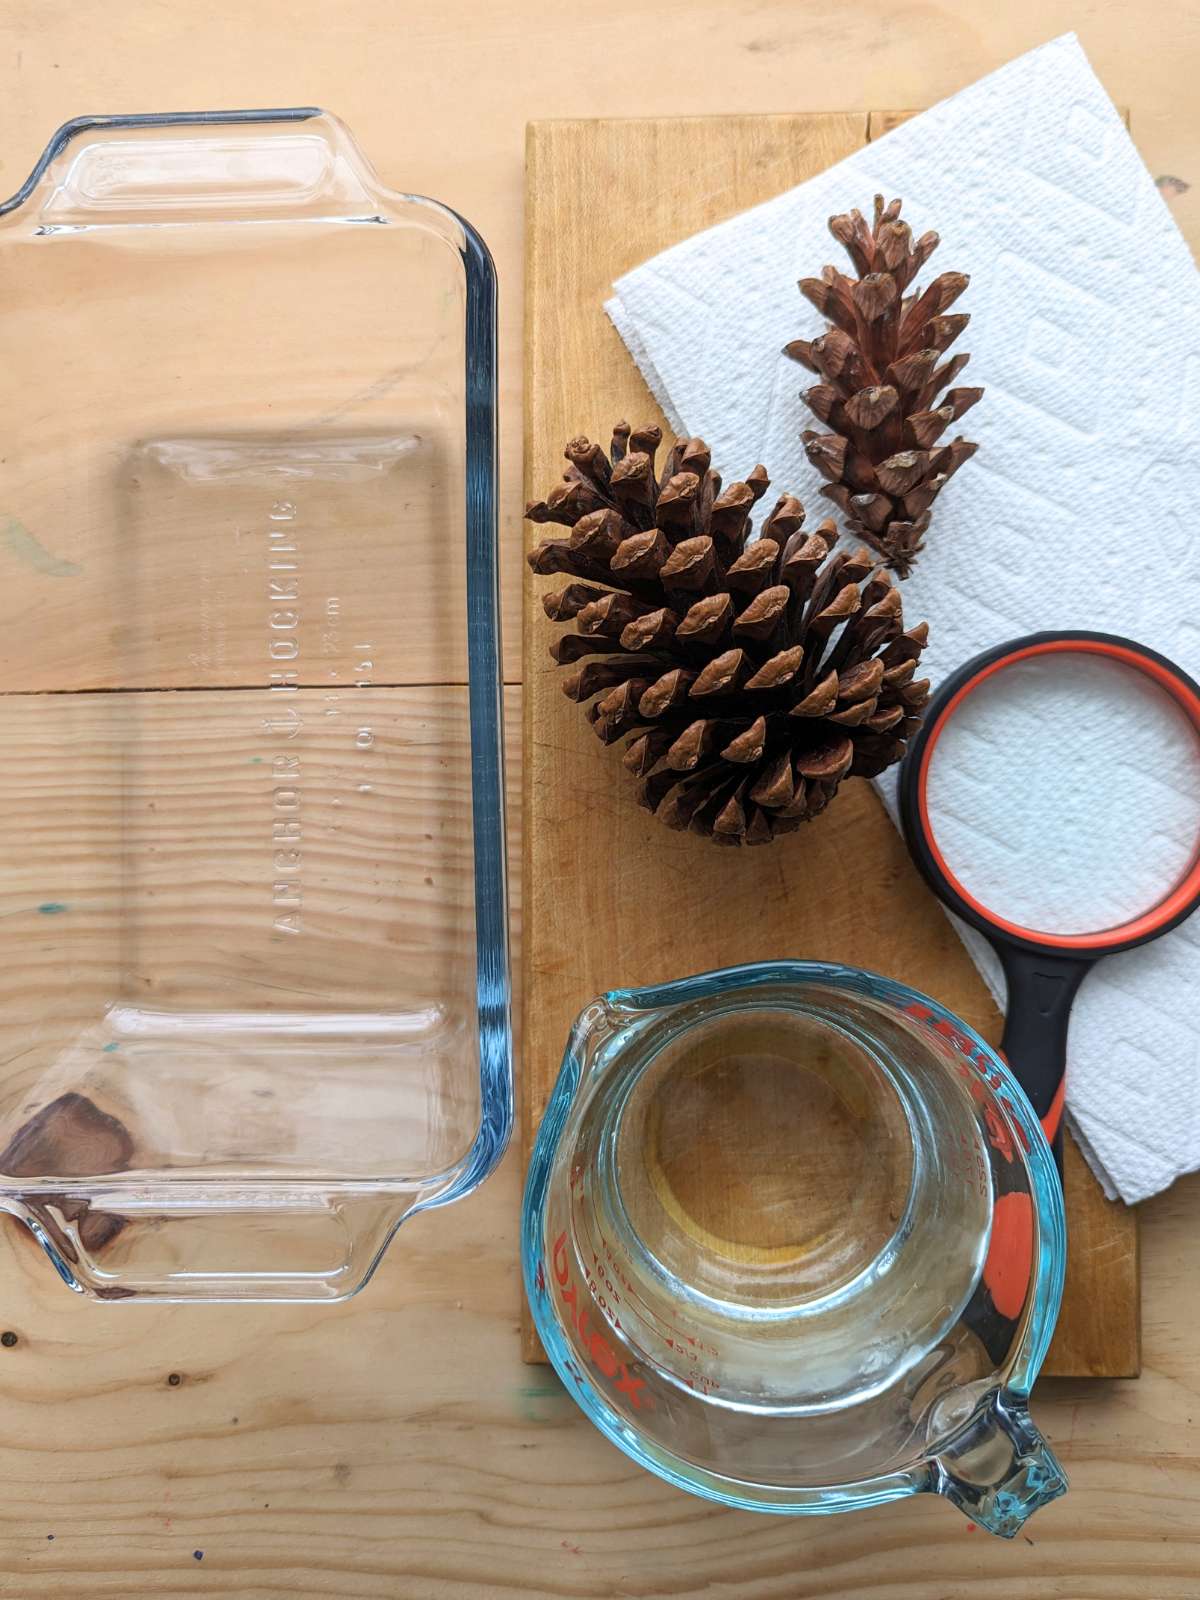 A rectangular glass dish next to two different pinecones on a paper towel with a red and black magnifying lens. Glass measuring cup below with water inside.